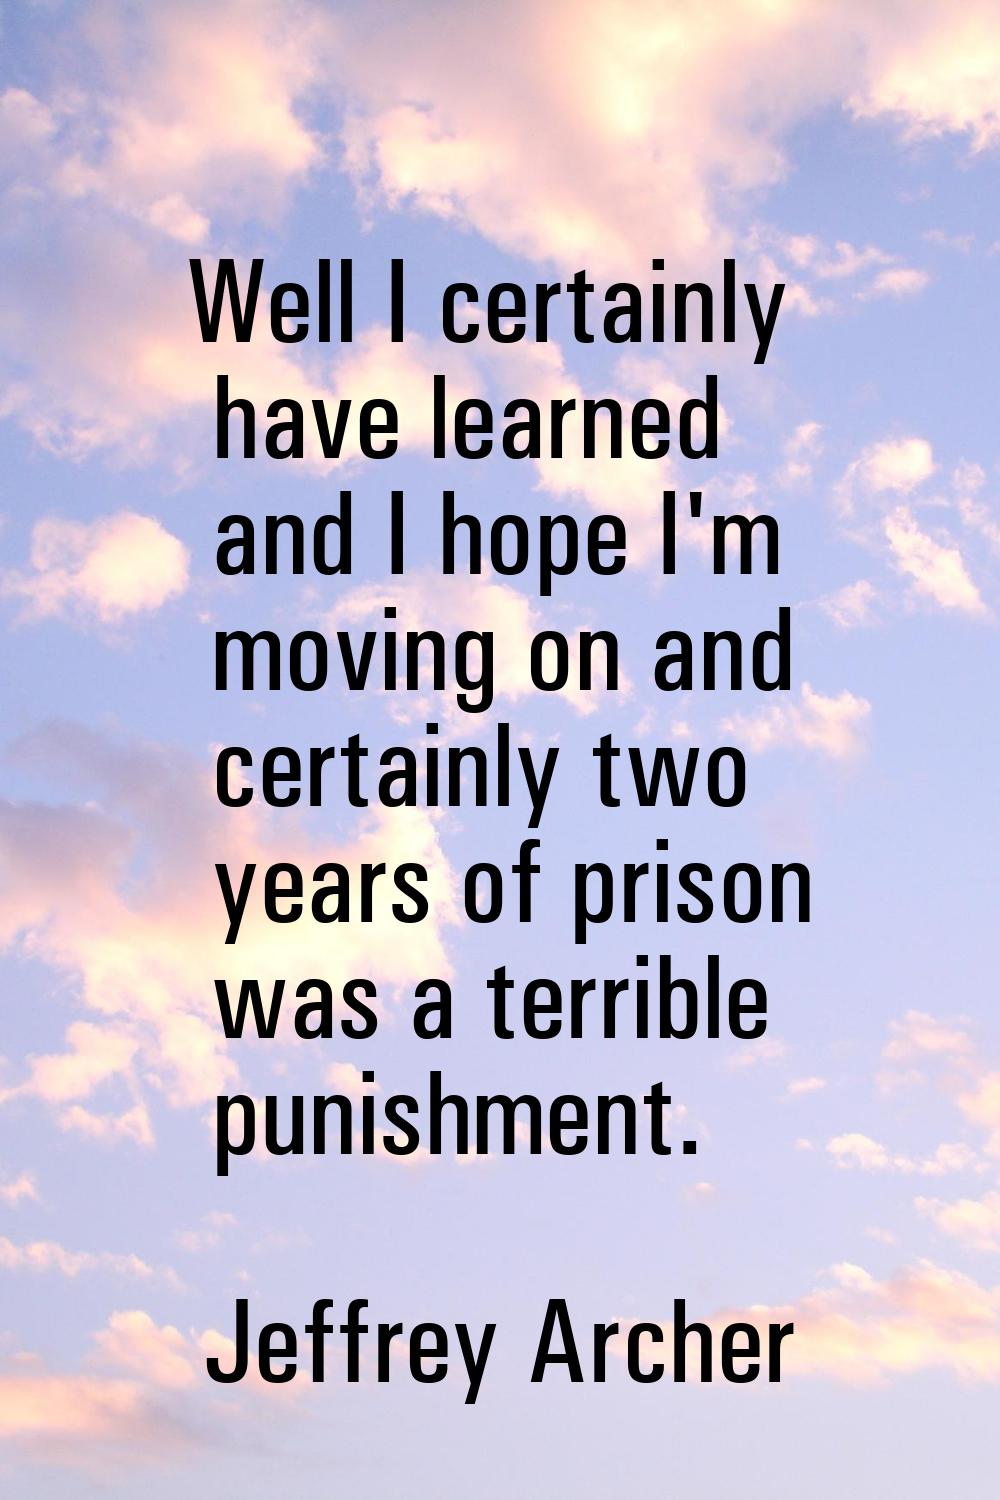 Well I certainly have learned and I hope I'm moving on and certainly two years of prison was a terr